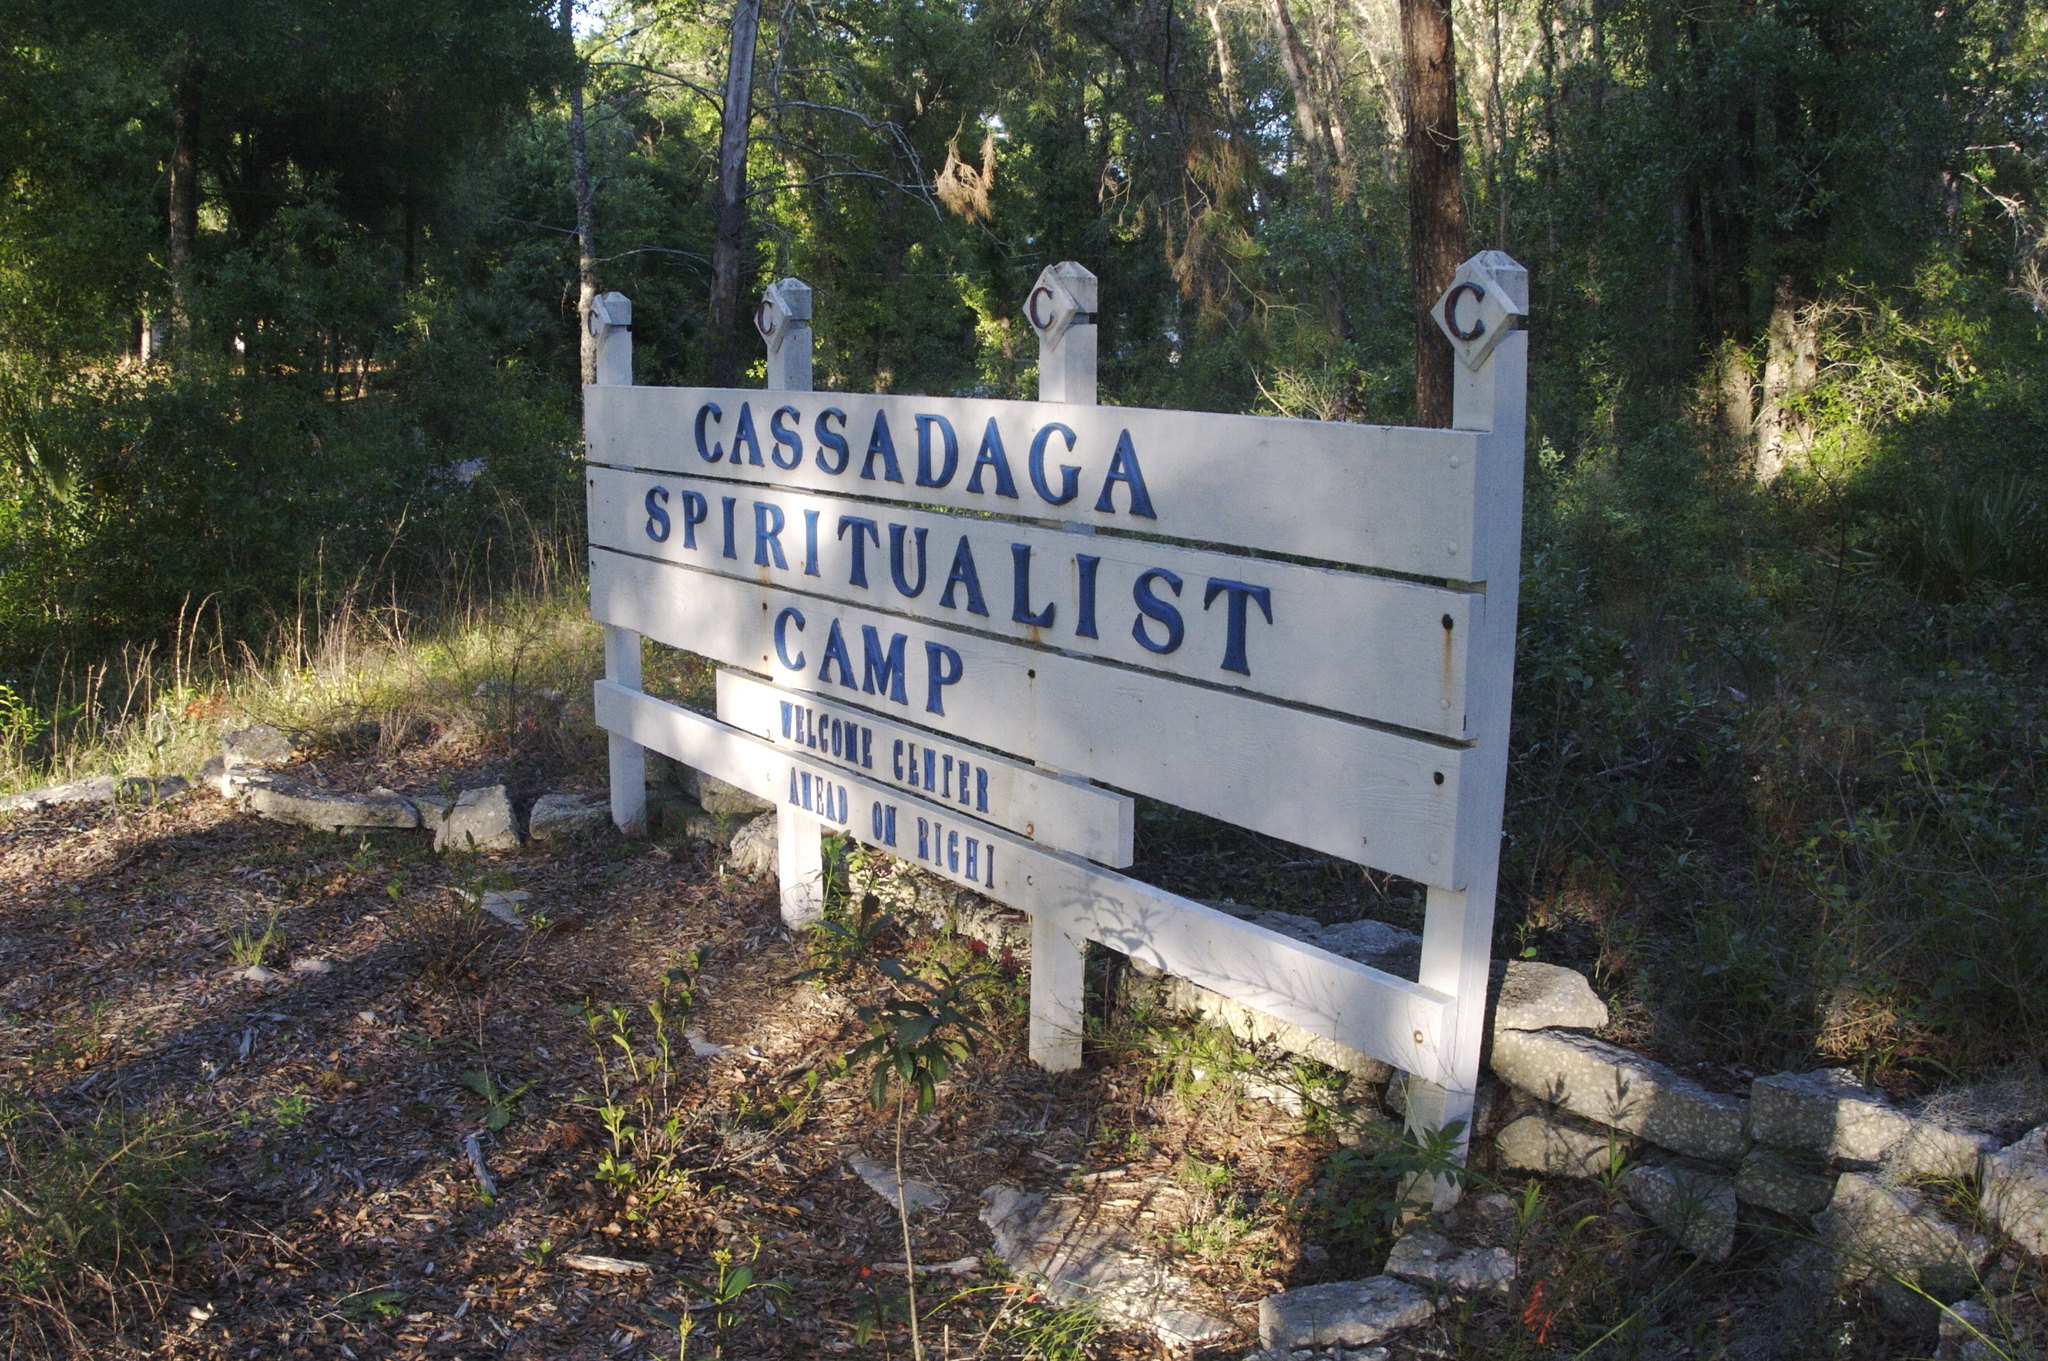 The sign at the entrance to the camp